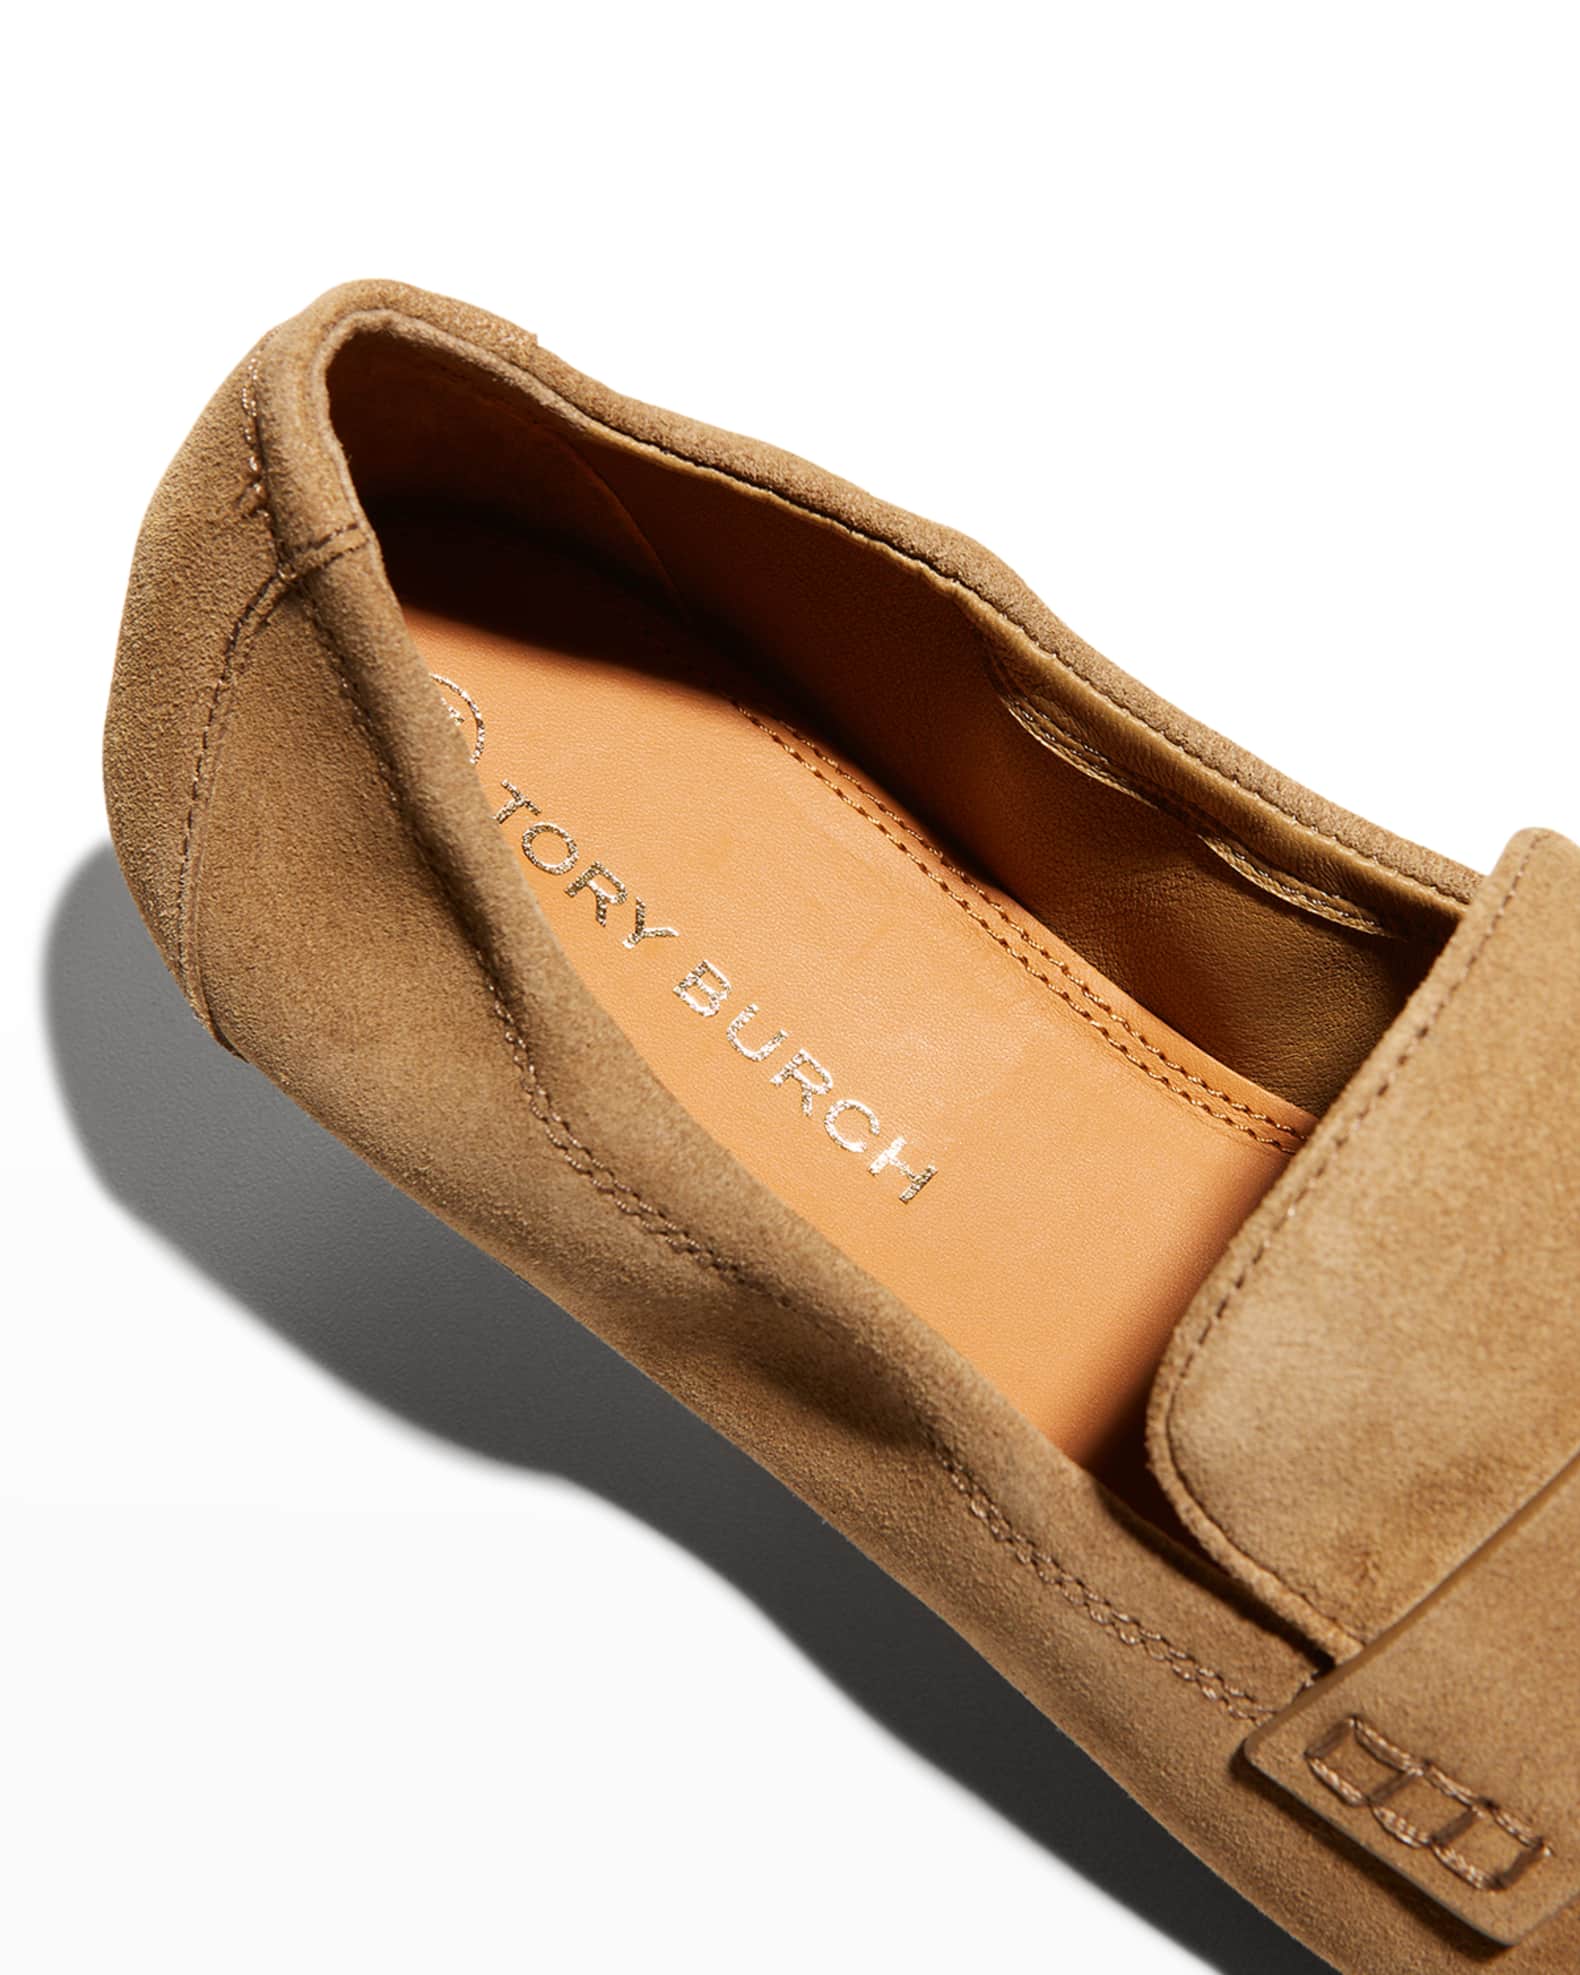 Tory Burch Ballet Loafers | Neiman Marcus